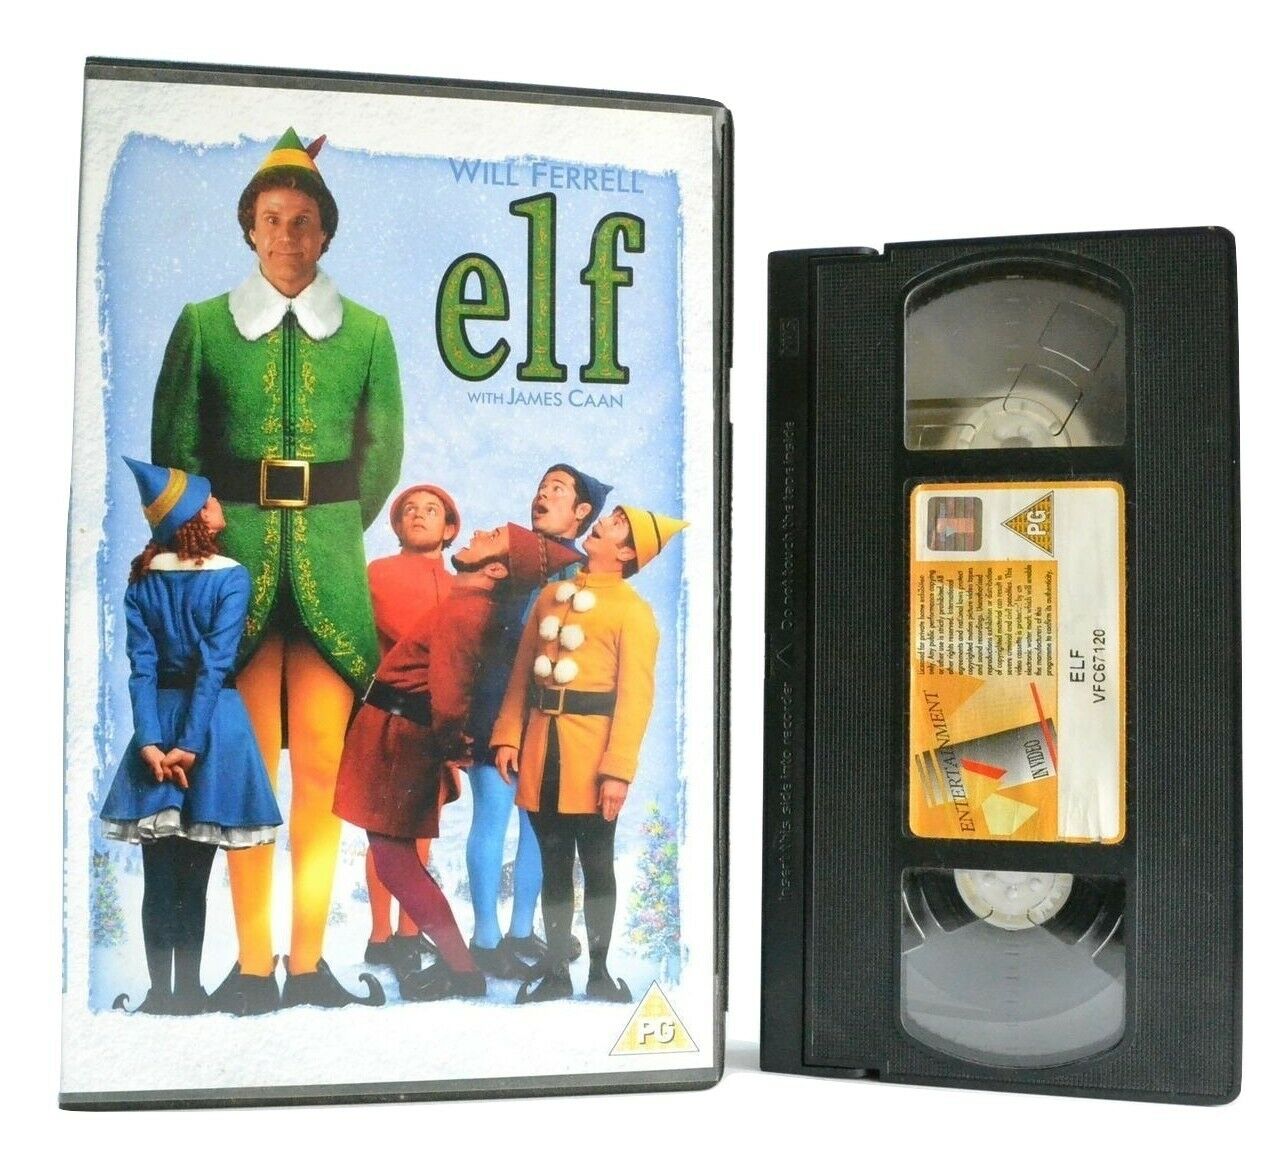 Elf: Christmas Comedy Film - Large Box (2004) - Will Ferrell/James Caan - VHS-